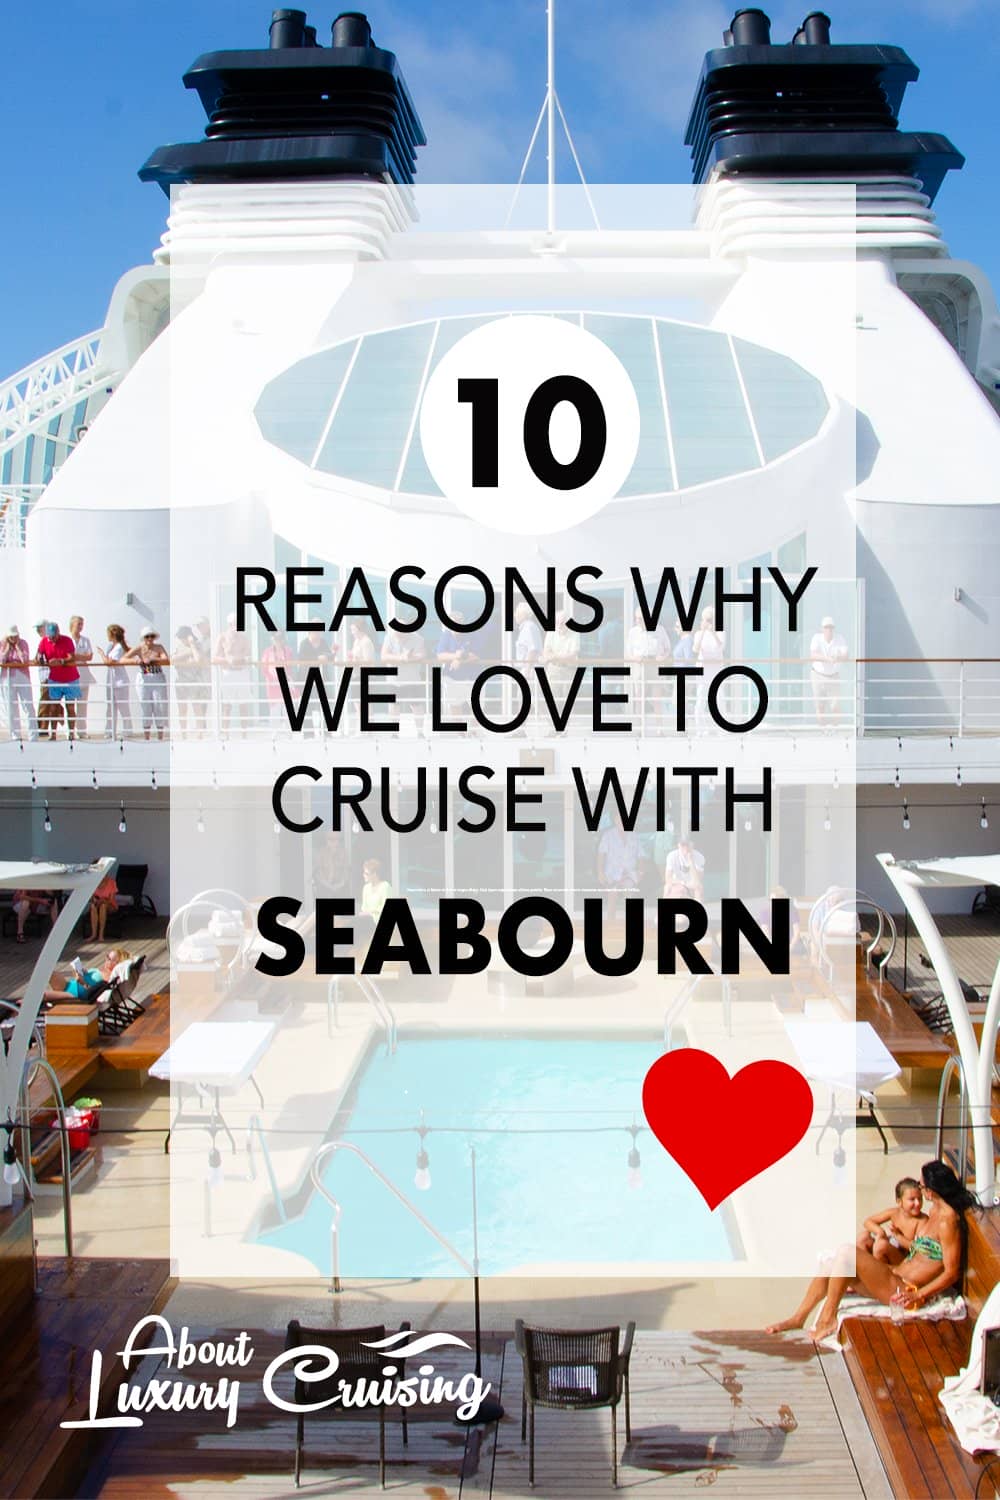 why we love to cruise with Seabourn